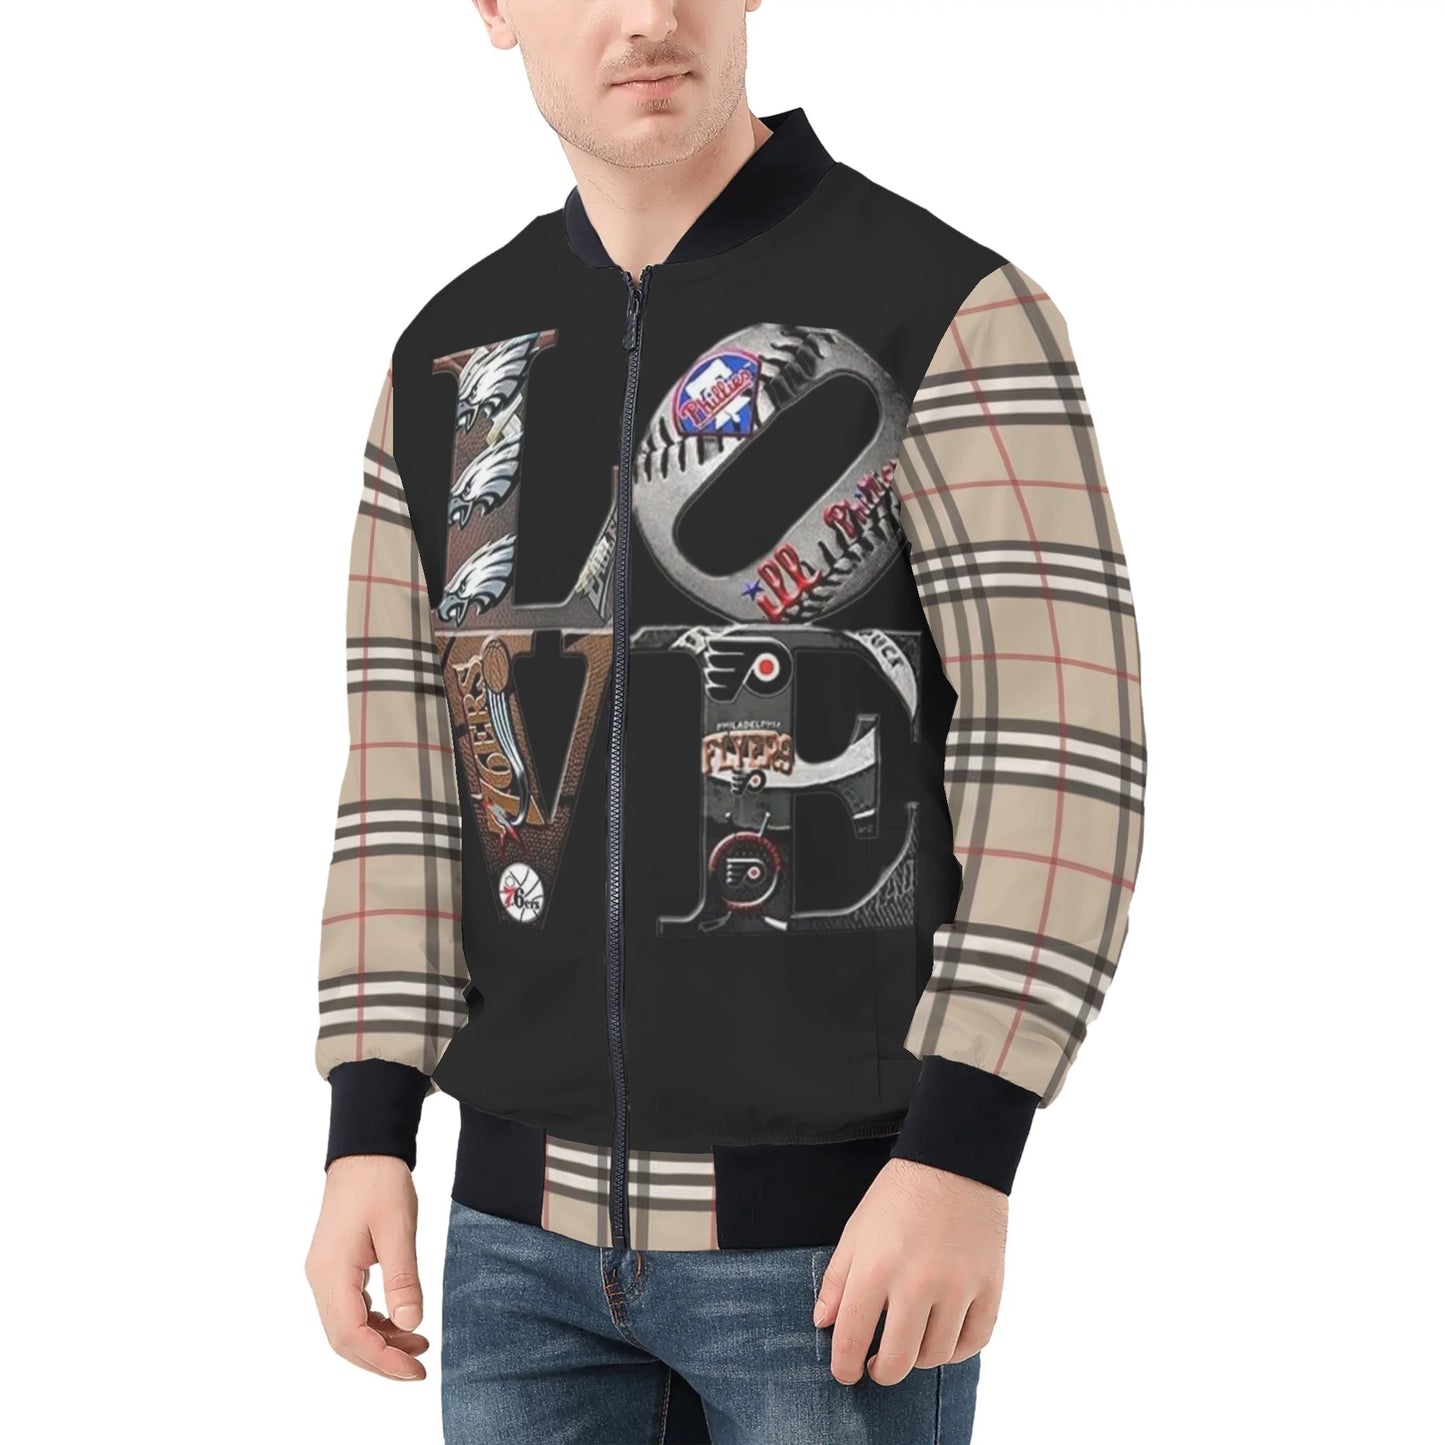 Mens Philly Brotherly Love Zip Bomber Jacket